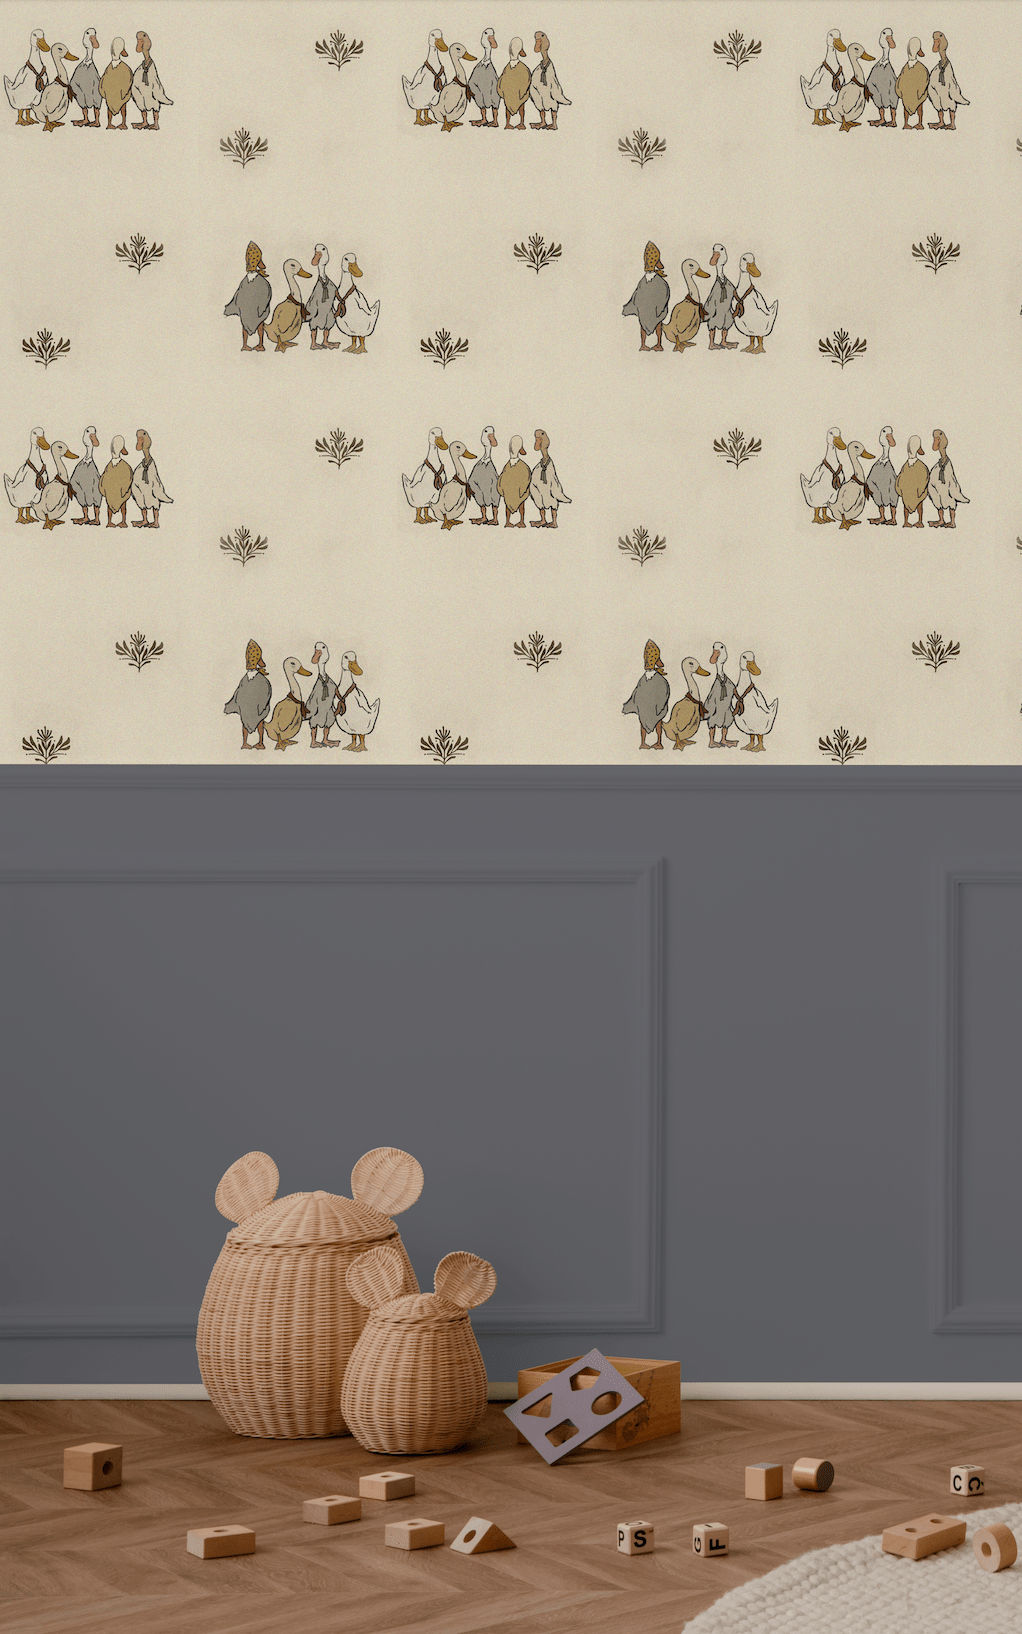 classic cute wallpaper with ducks for kids room decor, peel and stick